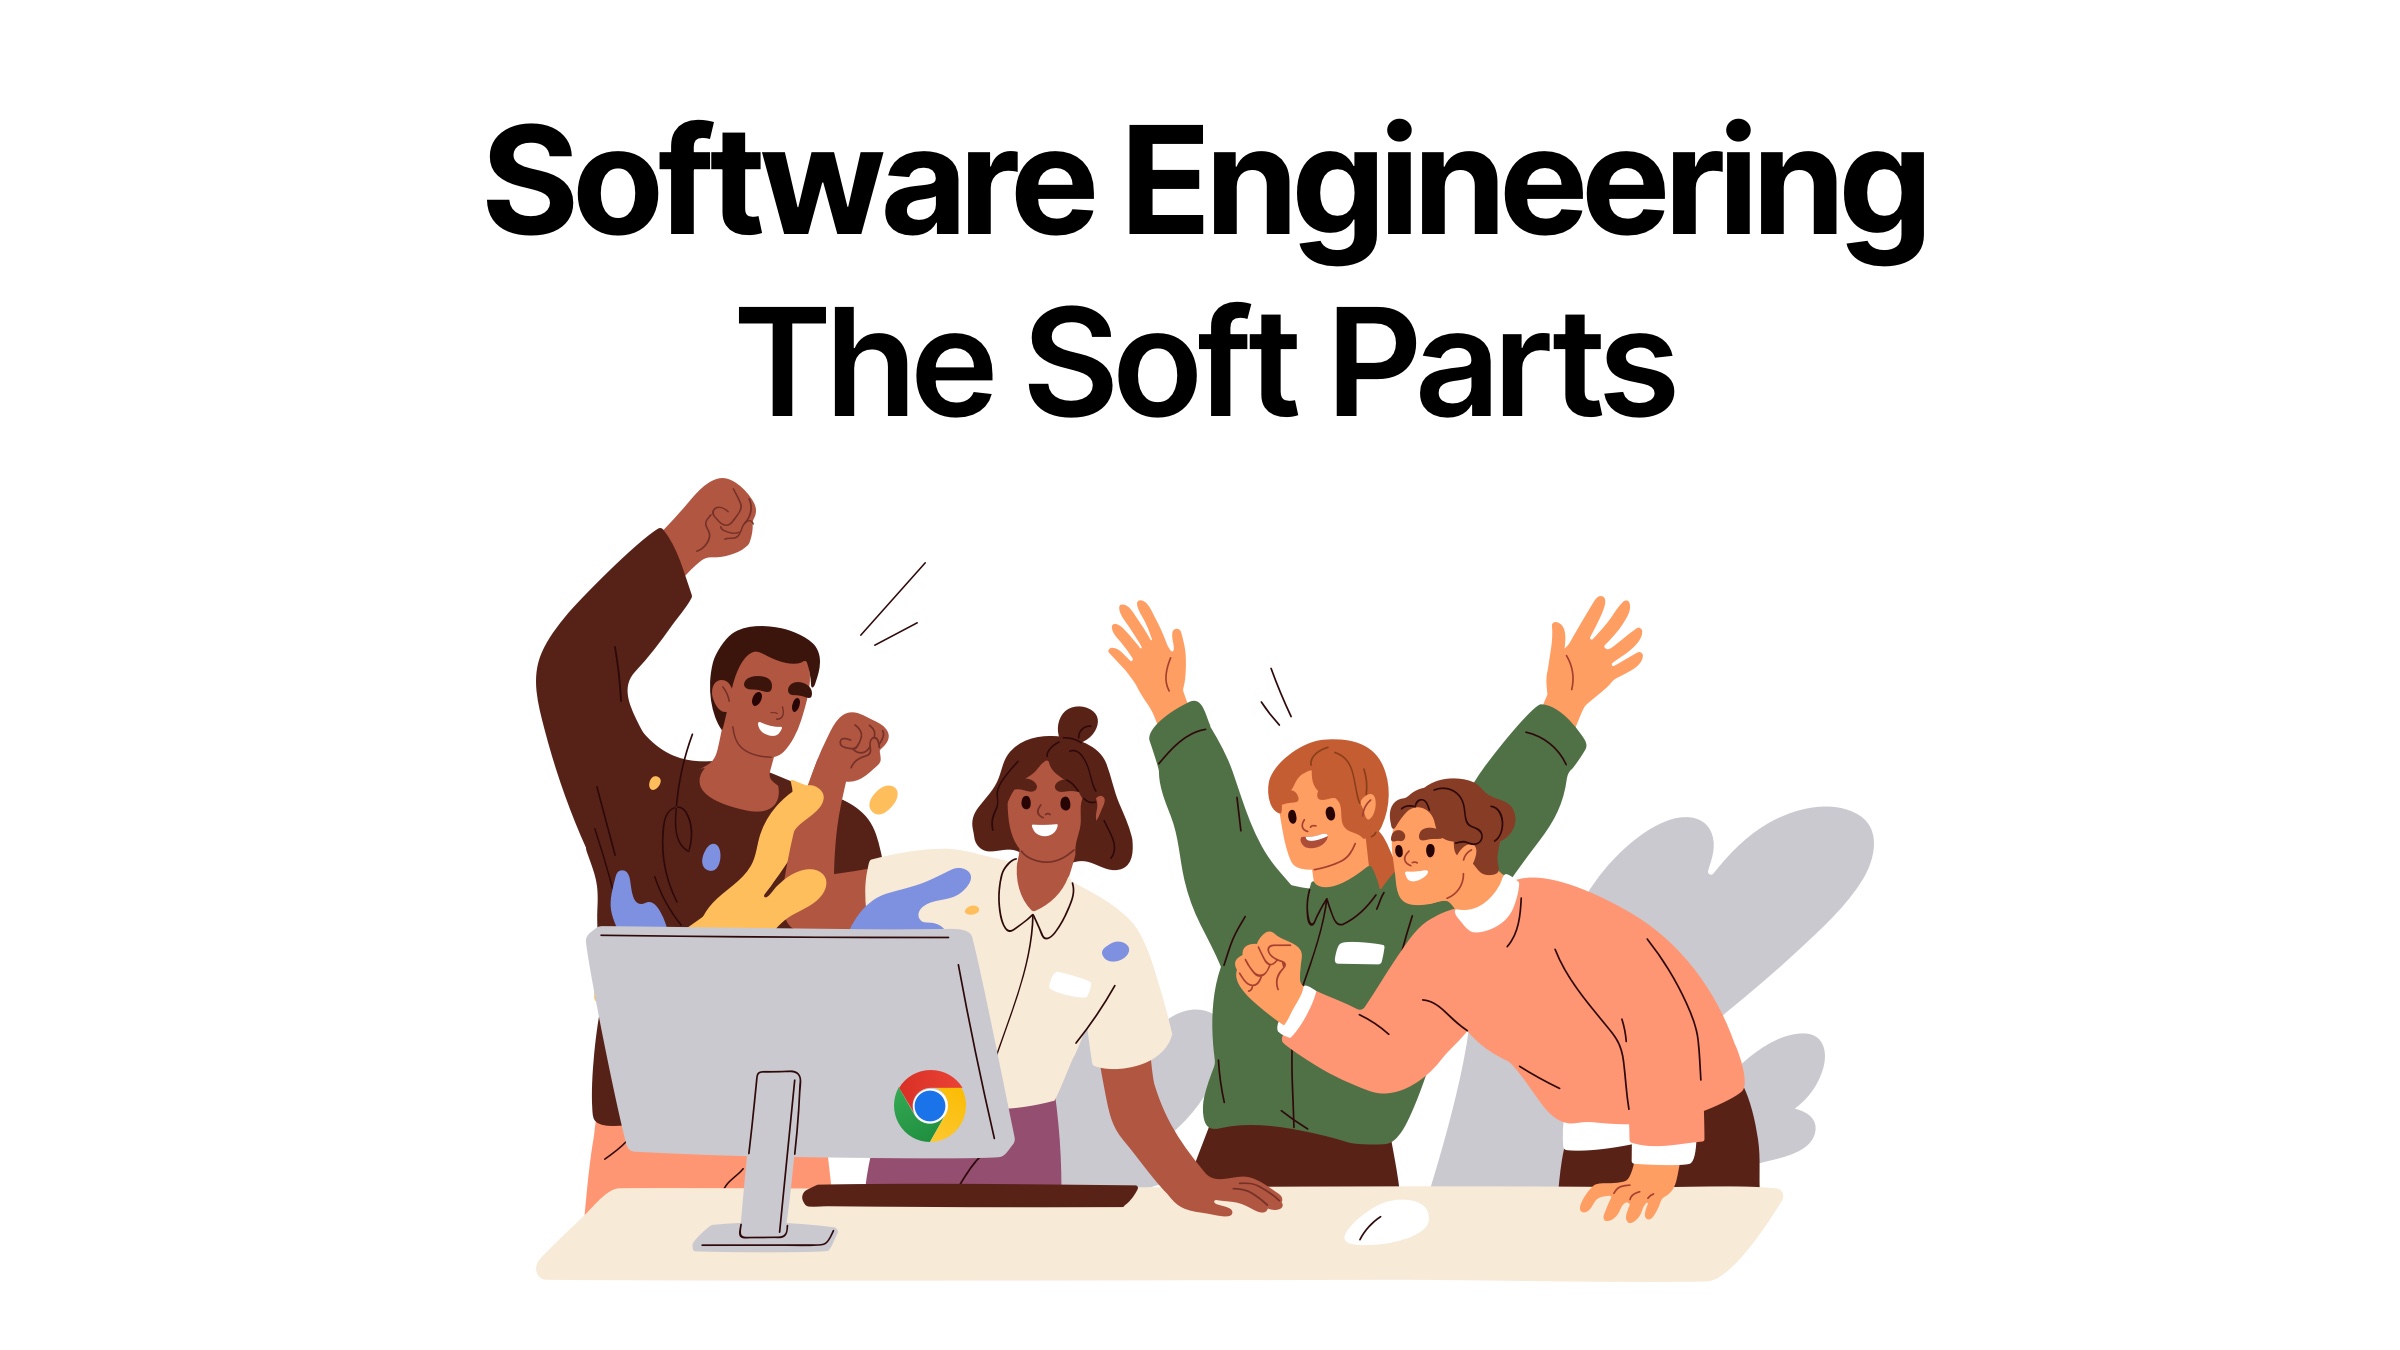  - Software Engineering - The Soft Parts